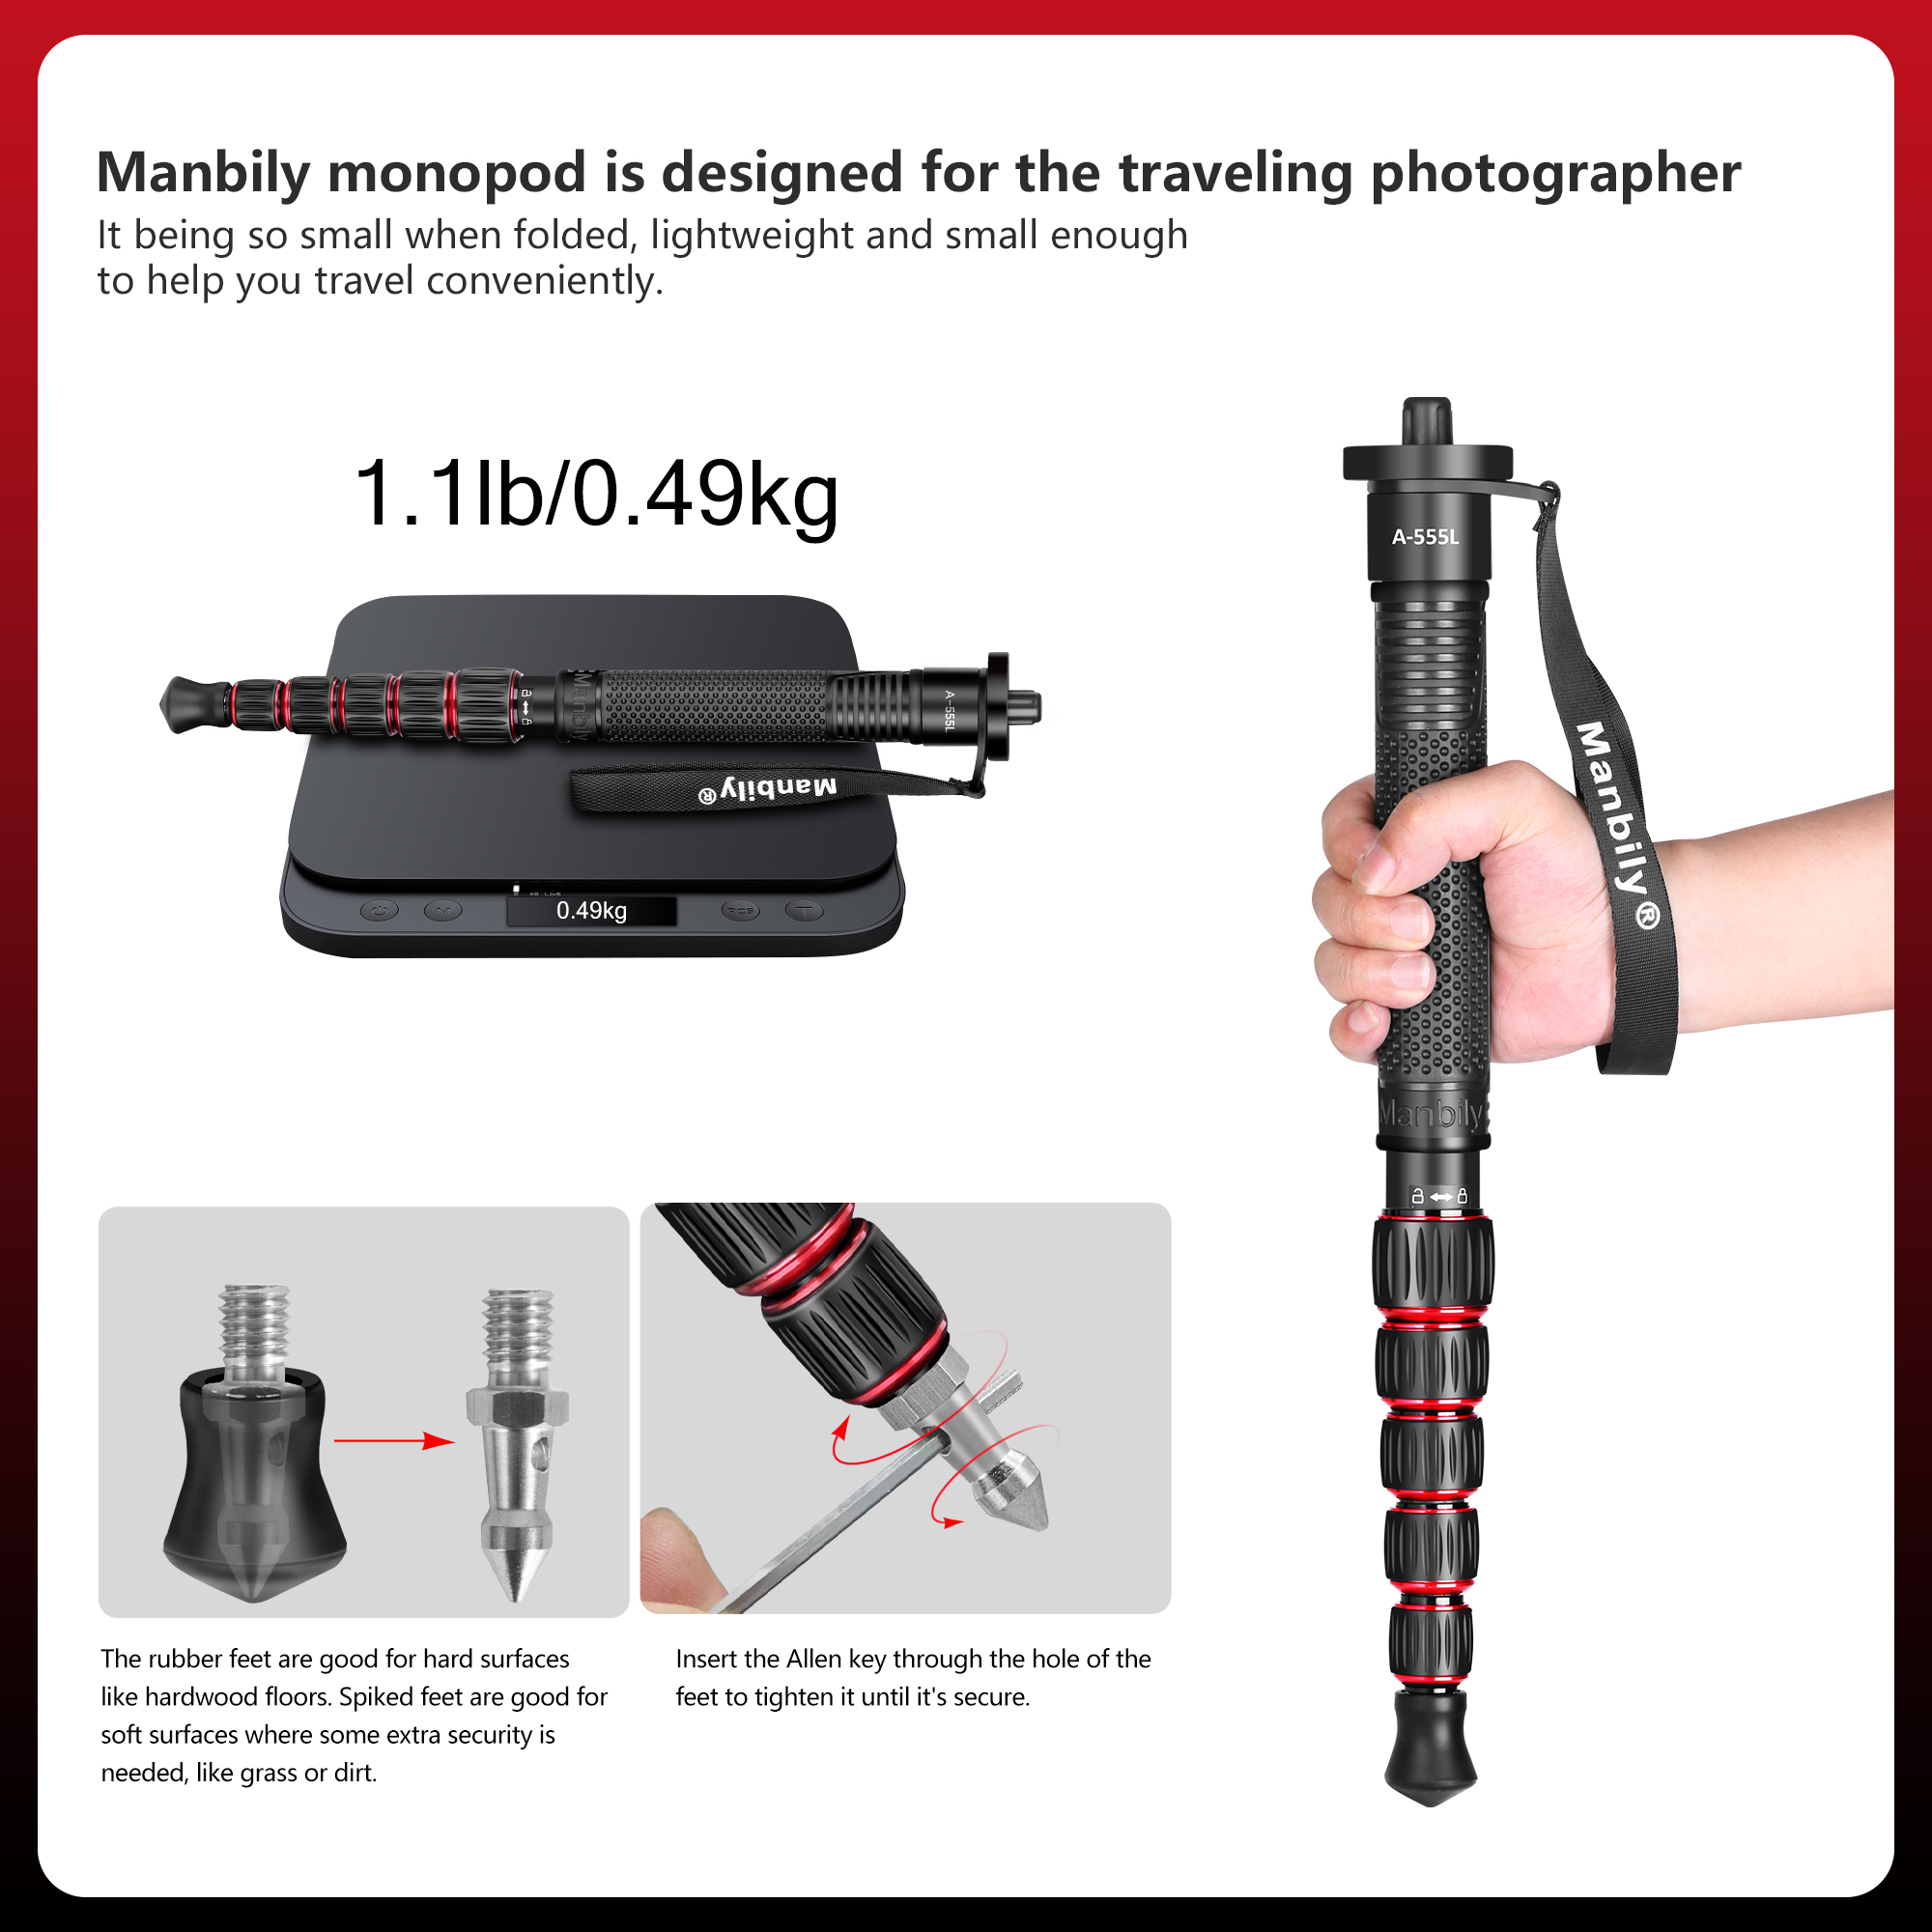 Manbily Camera Monopod Aluminum Portable Compact Lightweight Travel Monopod with Carrying Bag Walking Stick Handle,for DSLR Canon Nikon Sony Video Camcorder,6 Sections up to 61-in